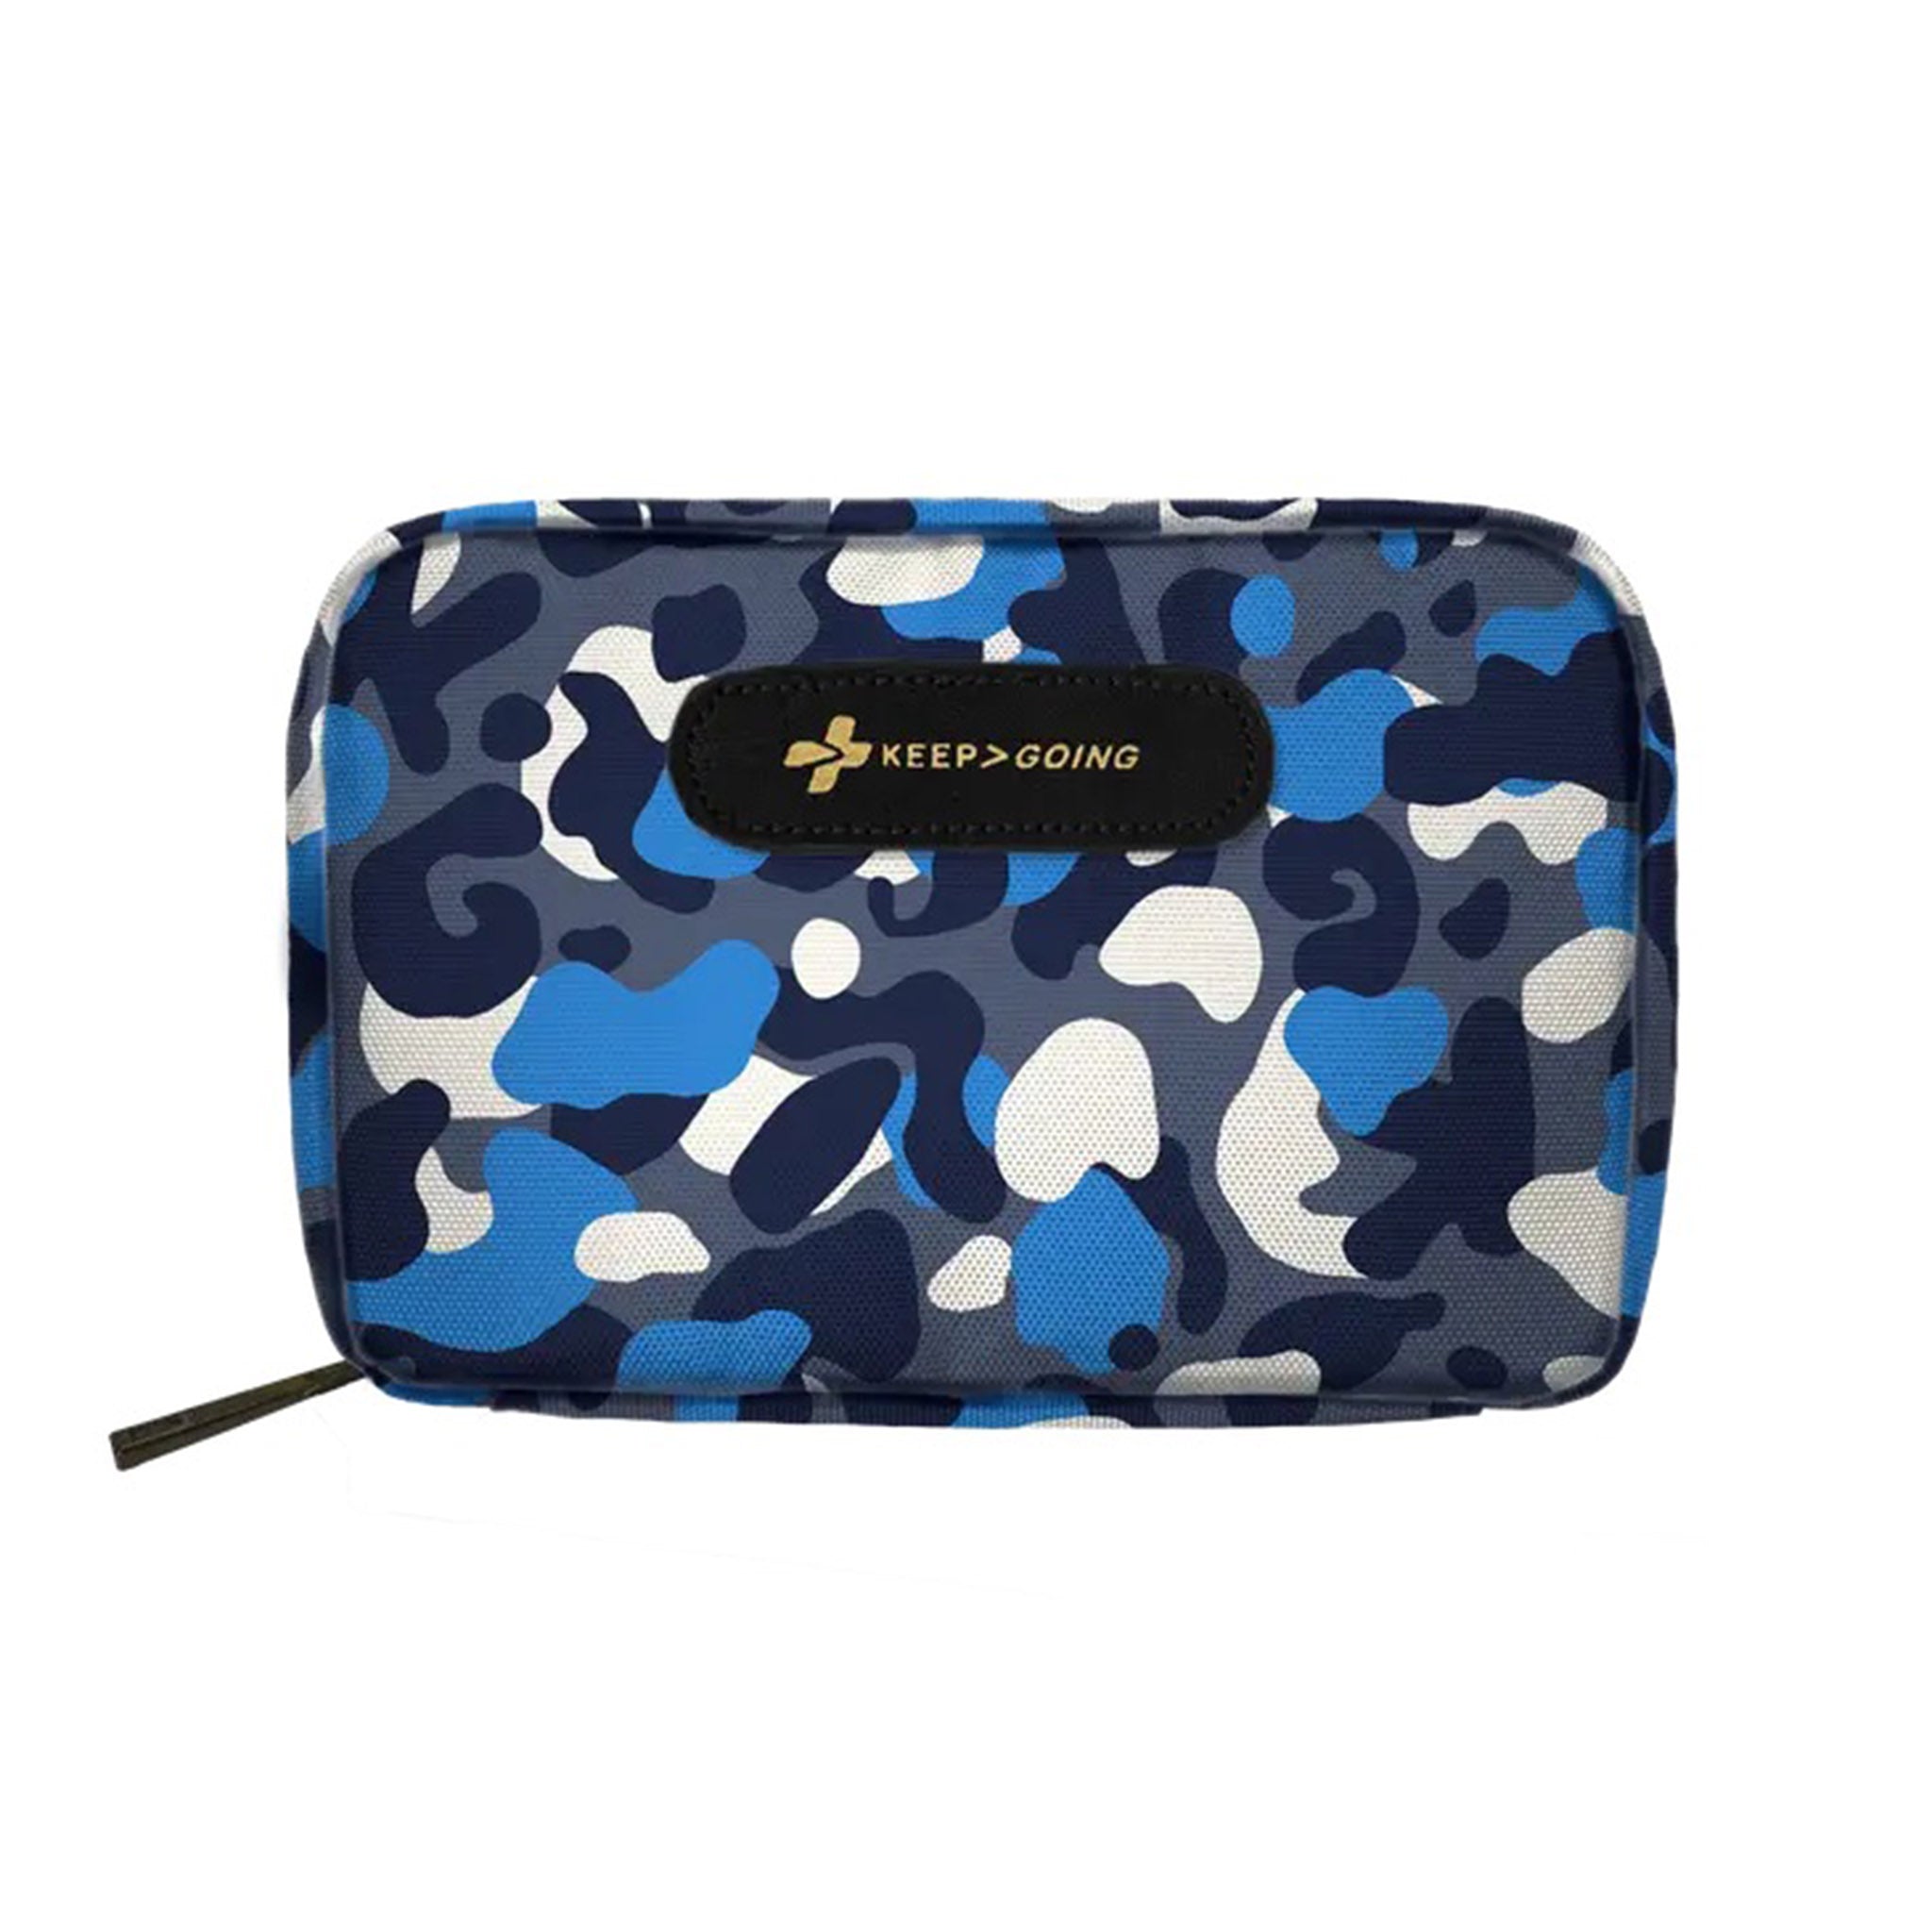 KEEP>GOING First Aid GoKit in Blue Camo (130 Pieces)